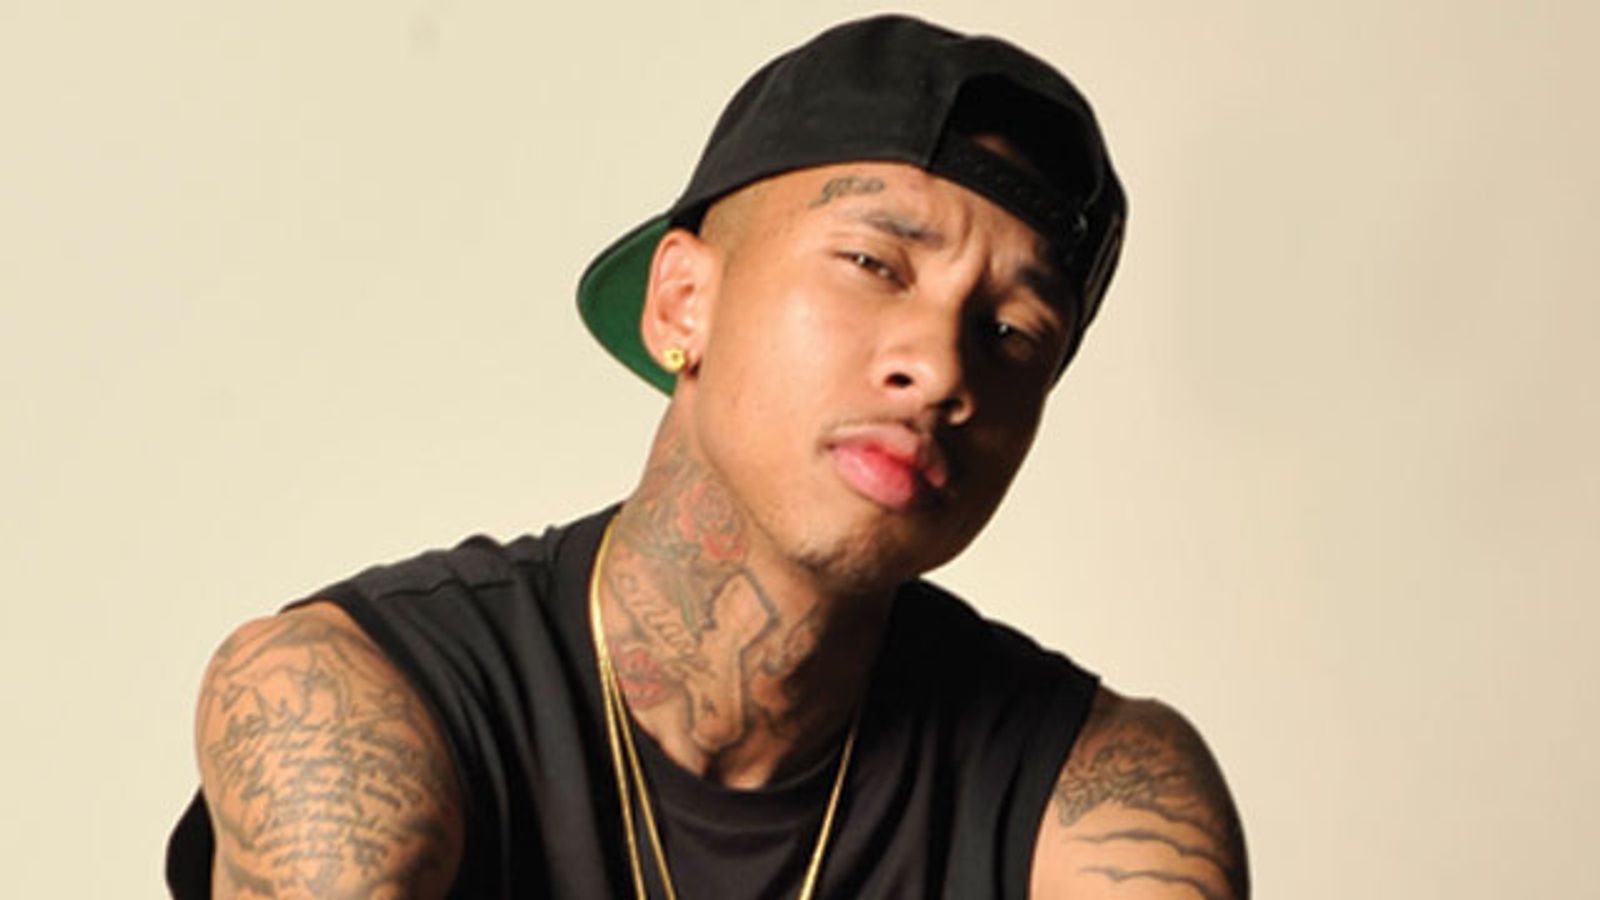 EXCLUSIVE: Hip-Hop Star Tyga Directs, Stars In 'Rack City XXX'